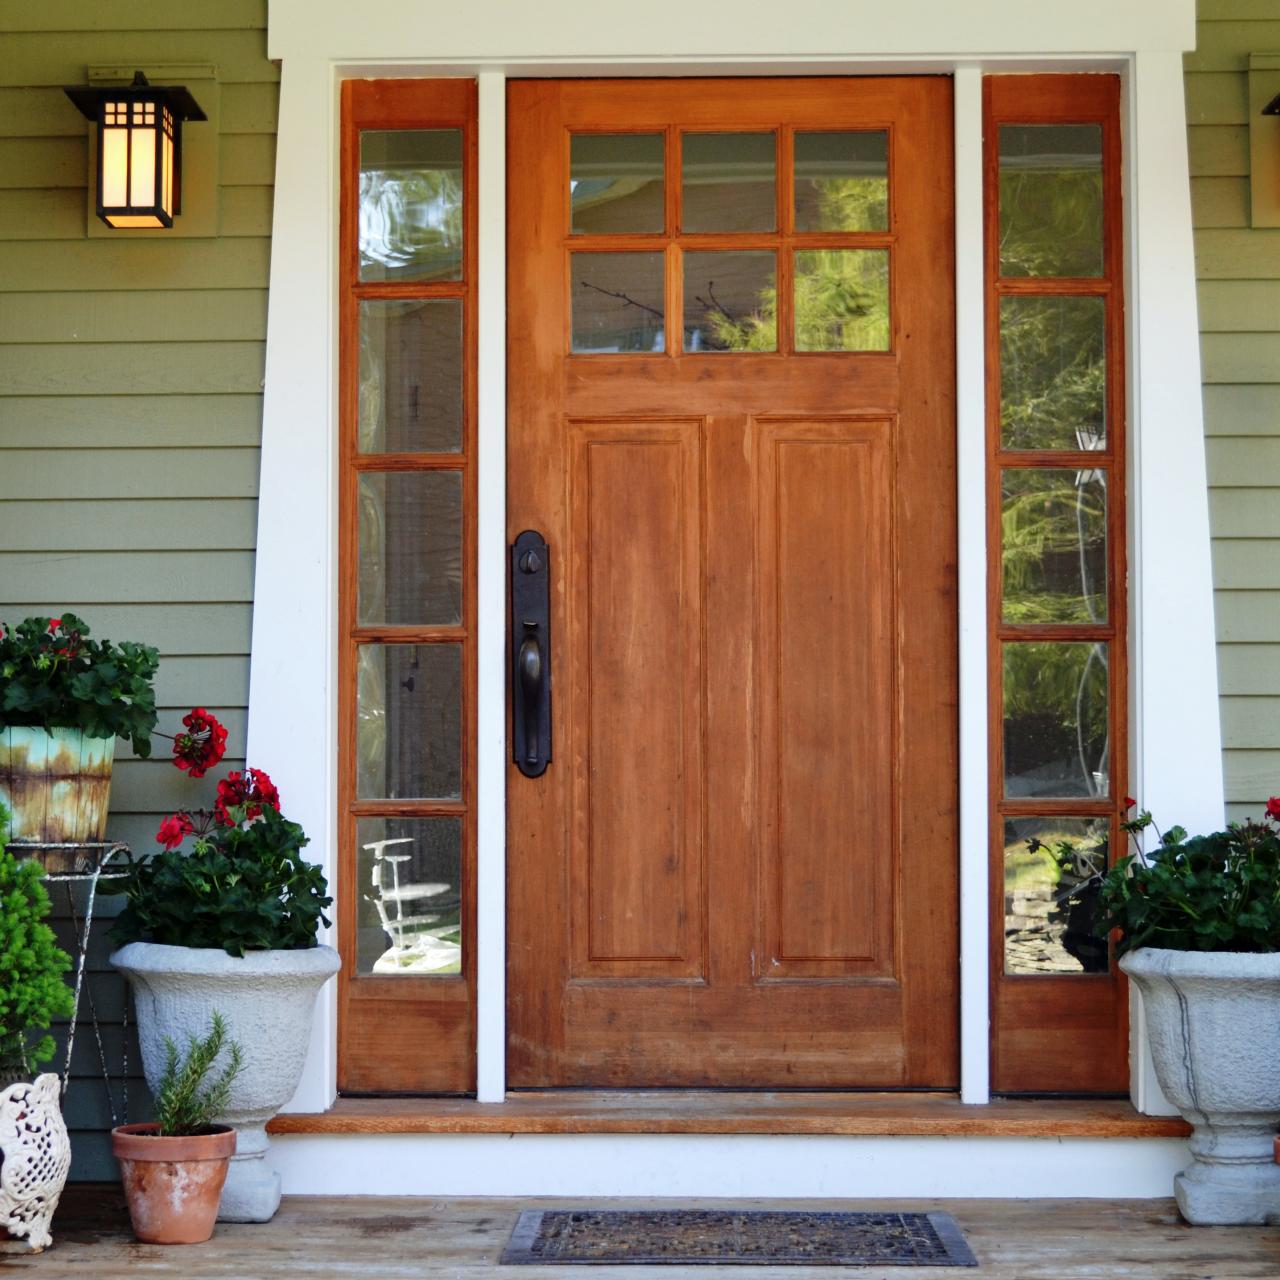 Decorating Ideas for Your Front Porch or Entryway